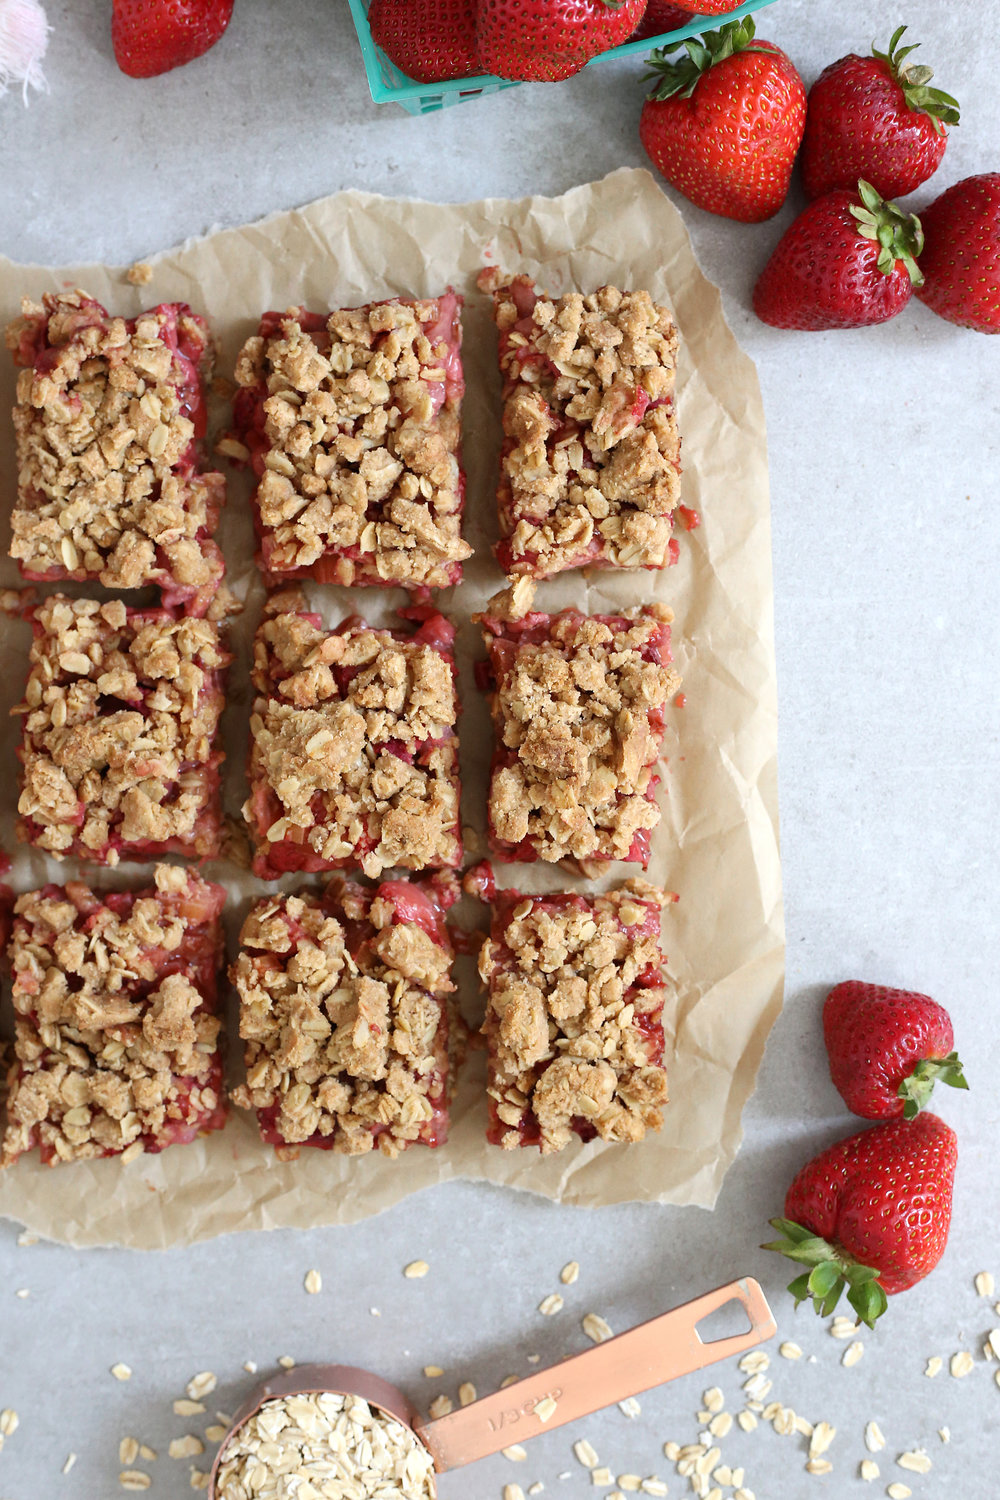 Perfect summer treat: Strawberry Rhubarb Bars! Get the recipe: Unusuallylovely.com